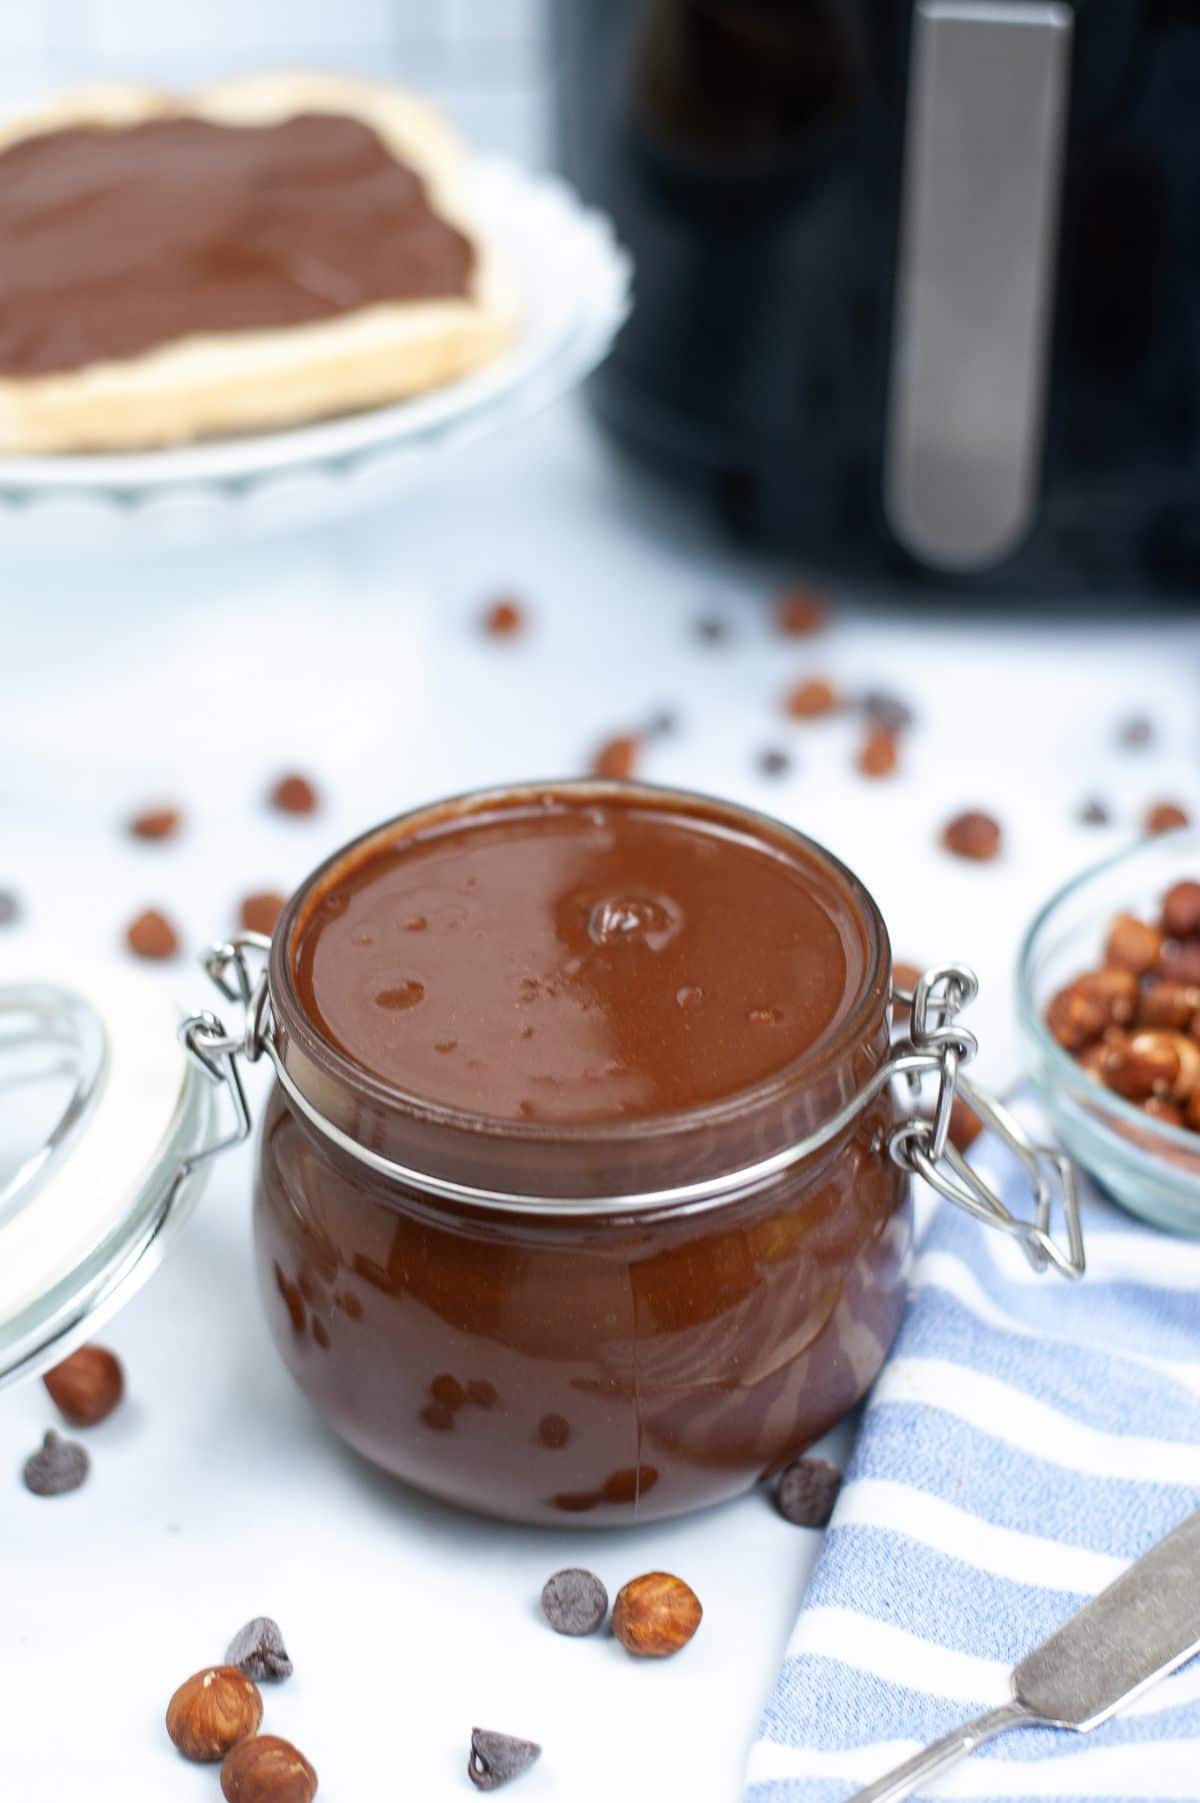 Homemade Nutella in a jar with an air fryer blurred in the background